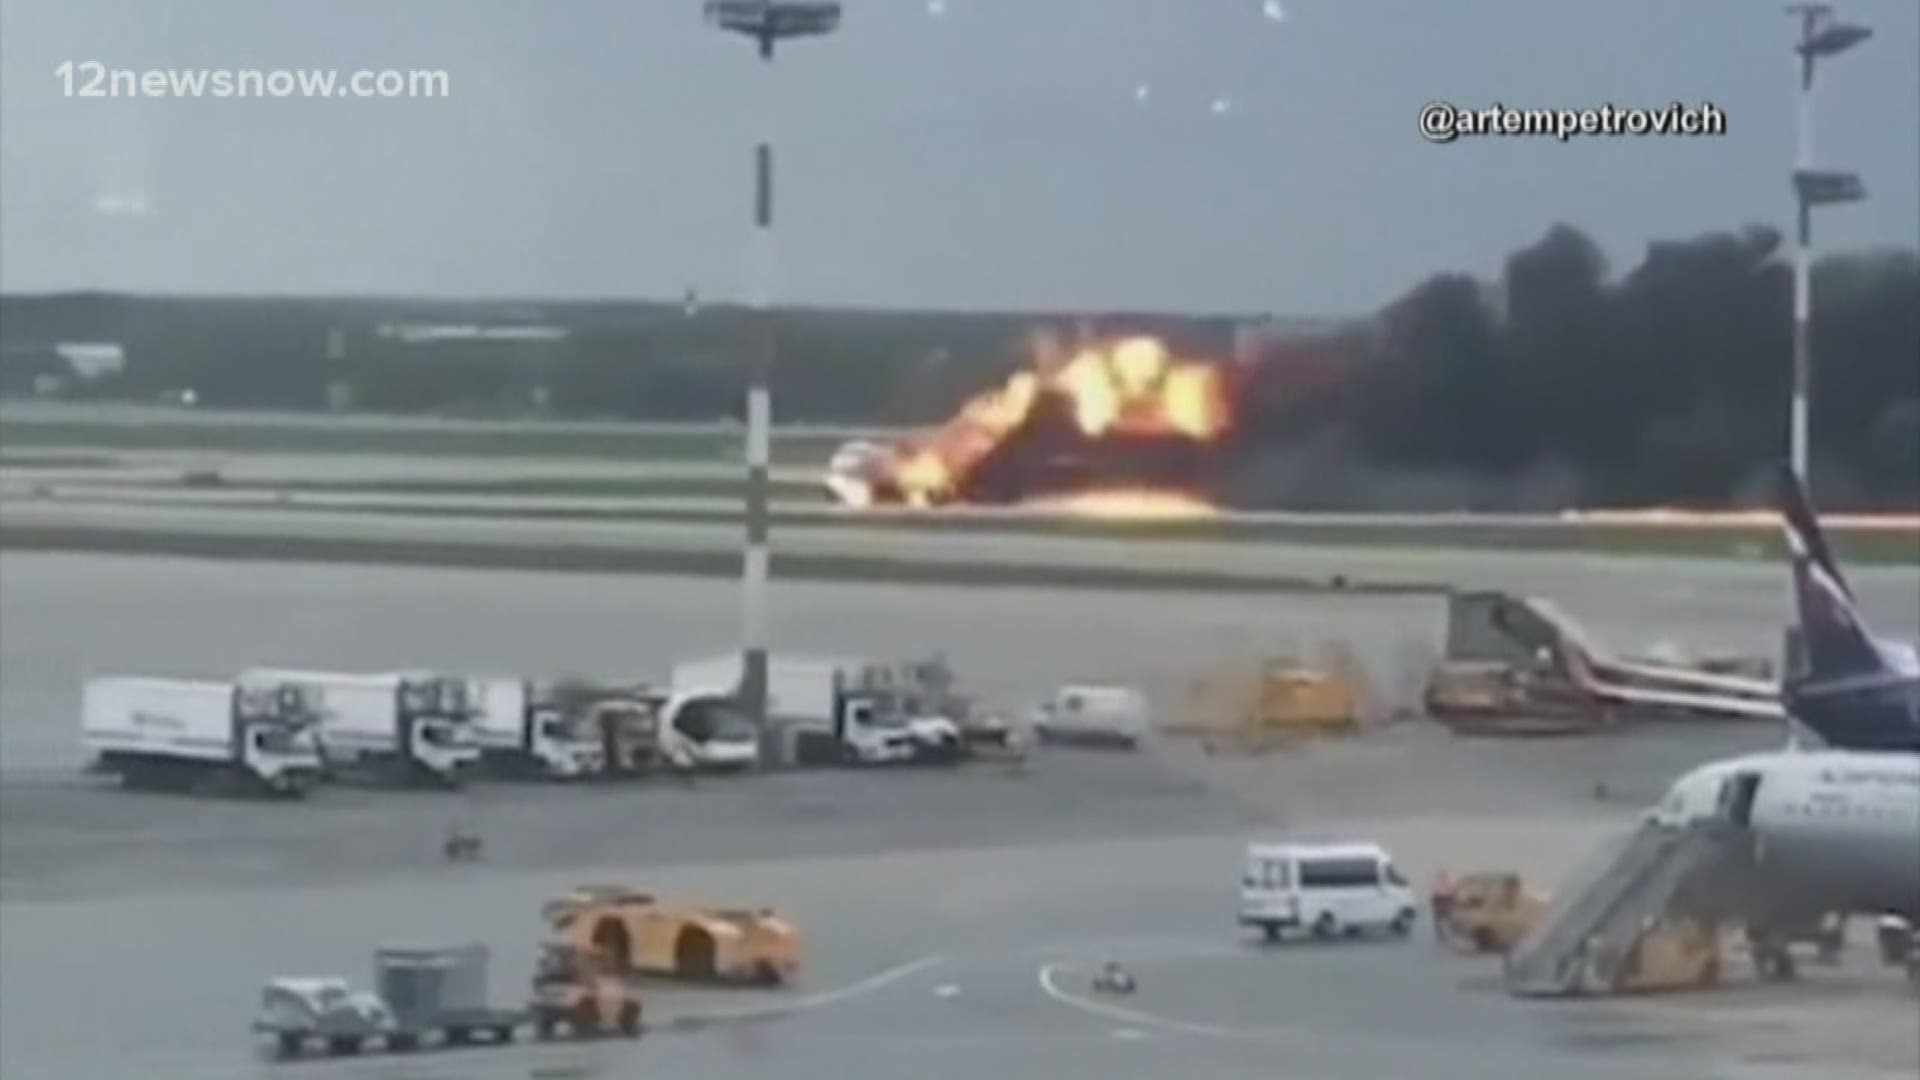 The plane was on a domestic flight when it turned back due to a problem. Russian investigators say the plane burst into flames as it hit the tarmac. 37 passengers escaped down the plane's inflatable emergency slides. So far, no official cause has been given for the disaster.